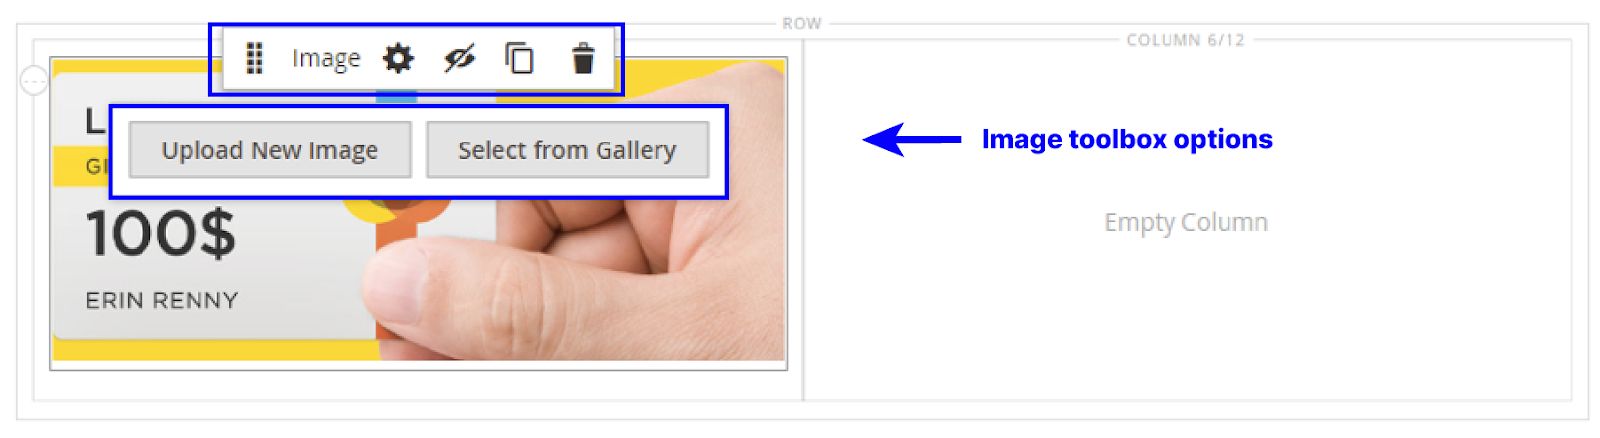 Image toolbox options in Magento Page Builder media